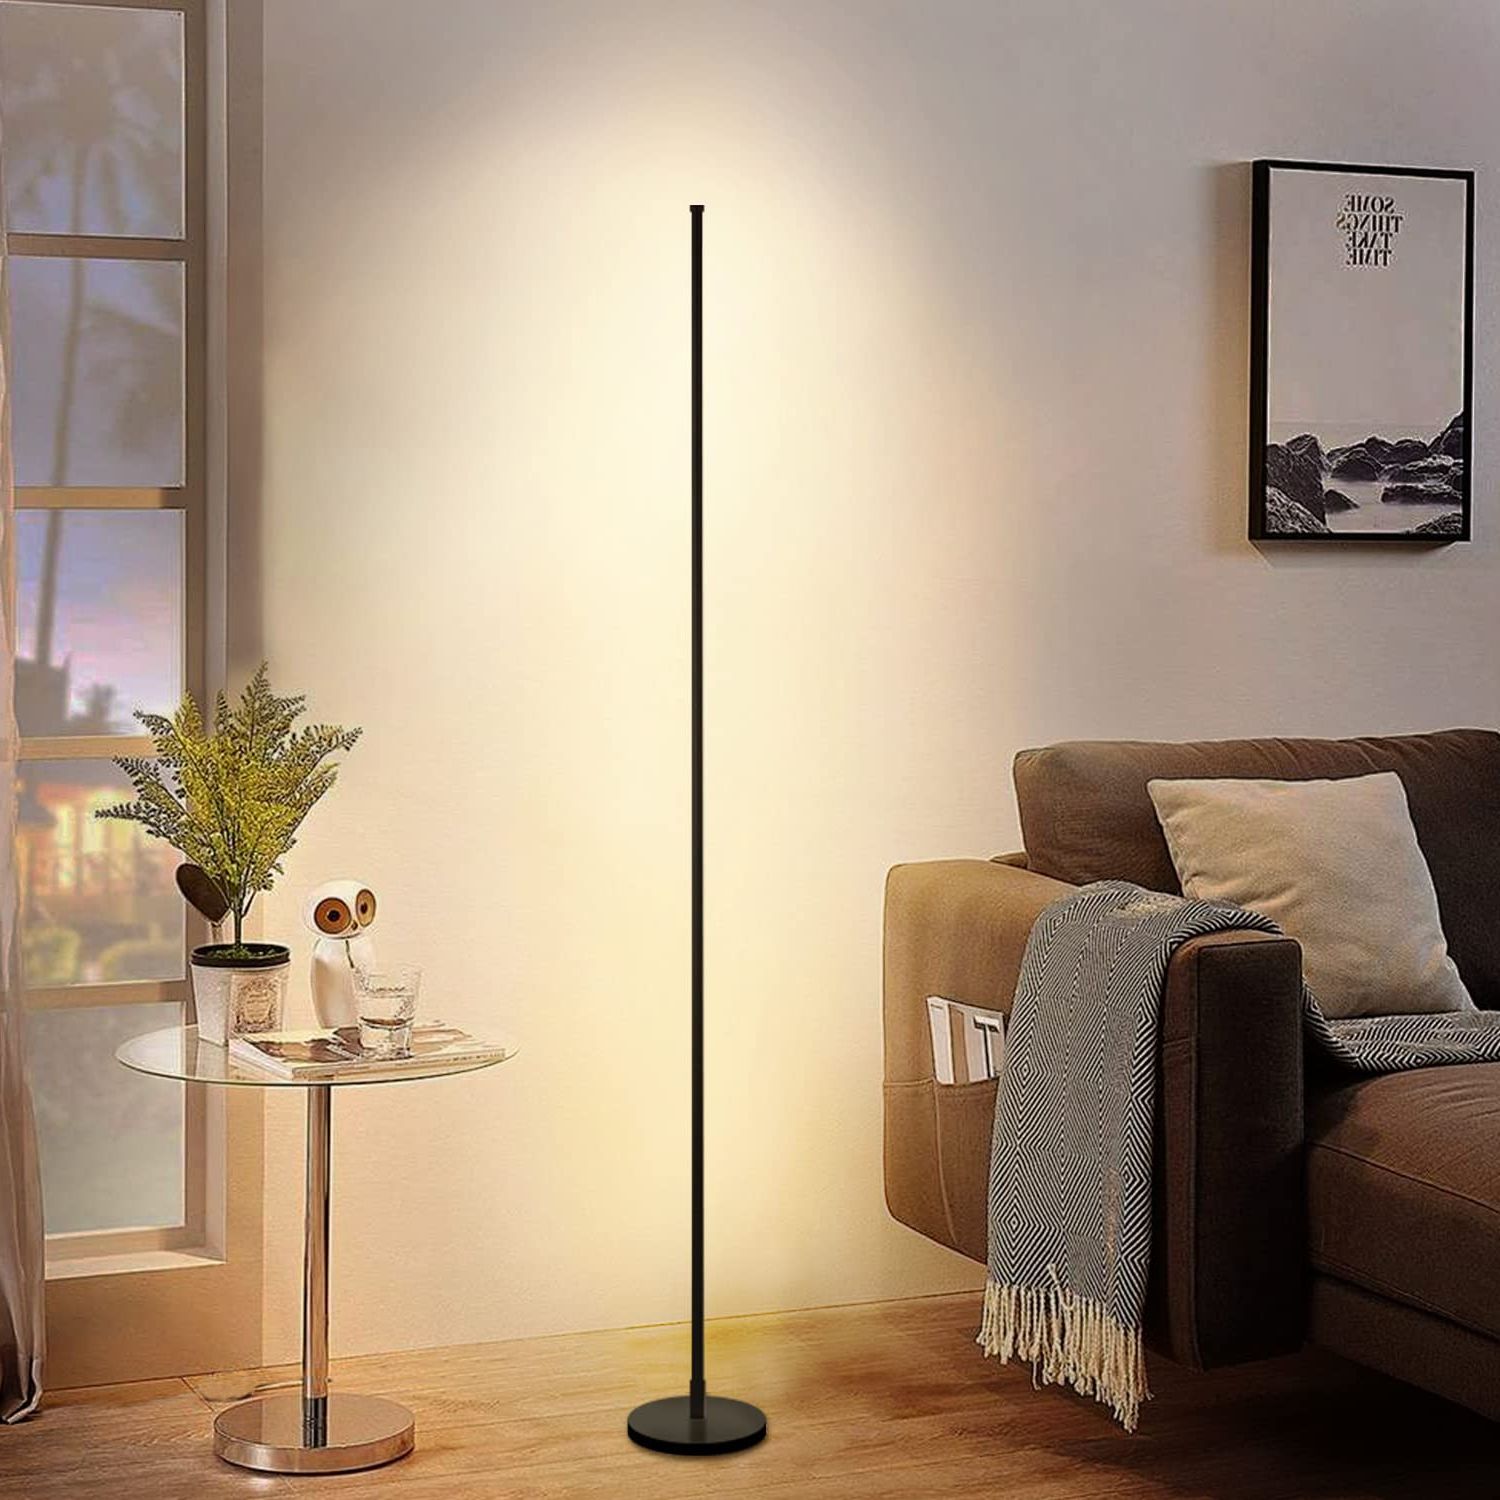 Most Recently Released Modern Standing Lamps Throughout Dengala Led Modern Floor Lamp – Metal Line Design Standing Corner Lamp With  Remote Controller – Dimmable Floor Lamps For Living Room Bedrooms,  2700k 6500k Lights For Indoor Decor Black (View 11 of 15)